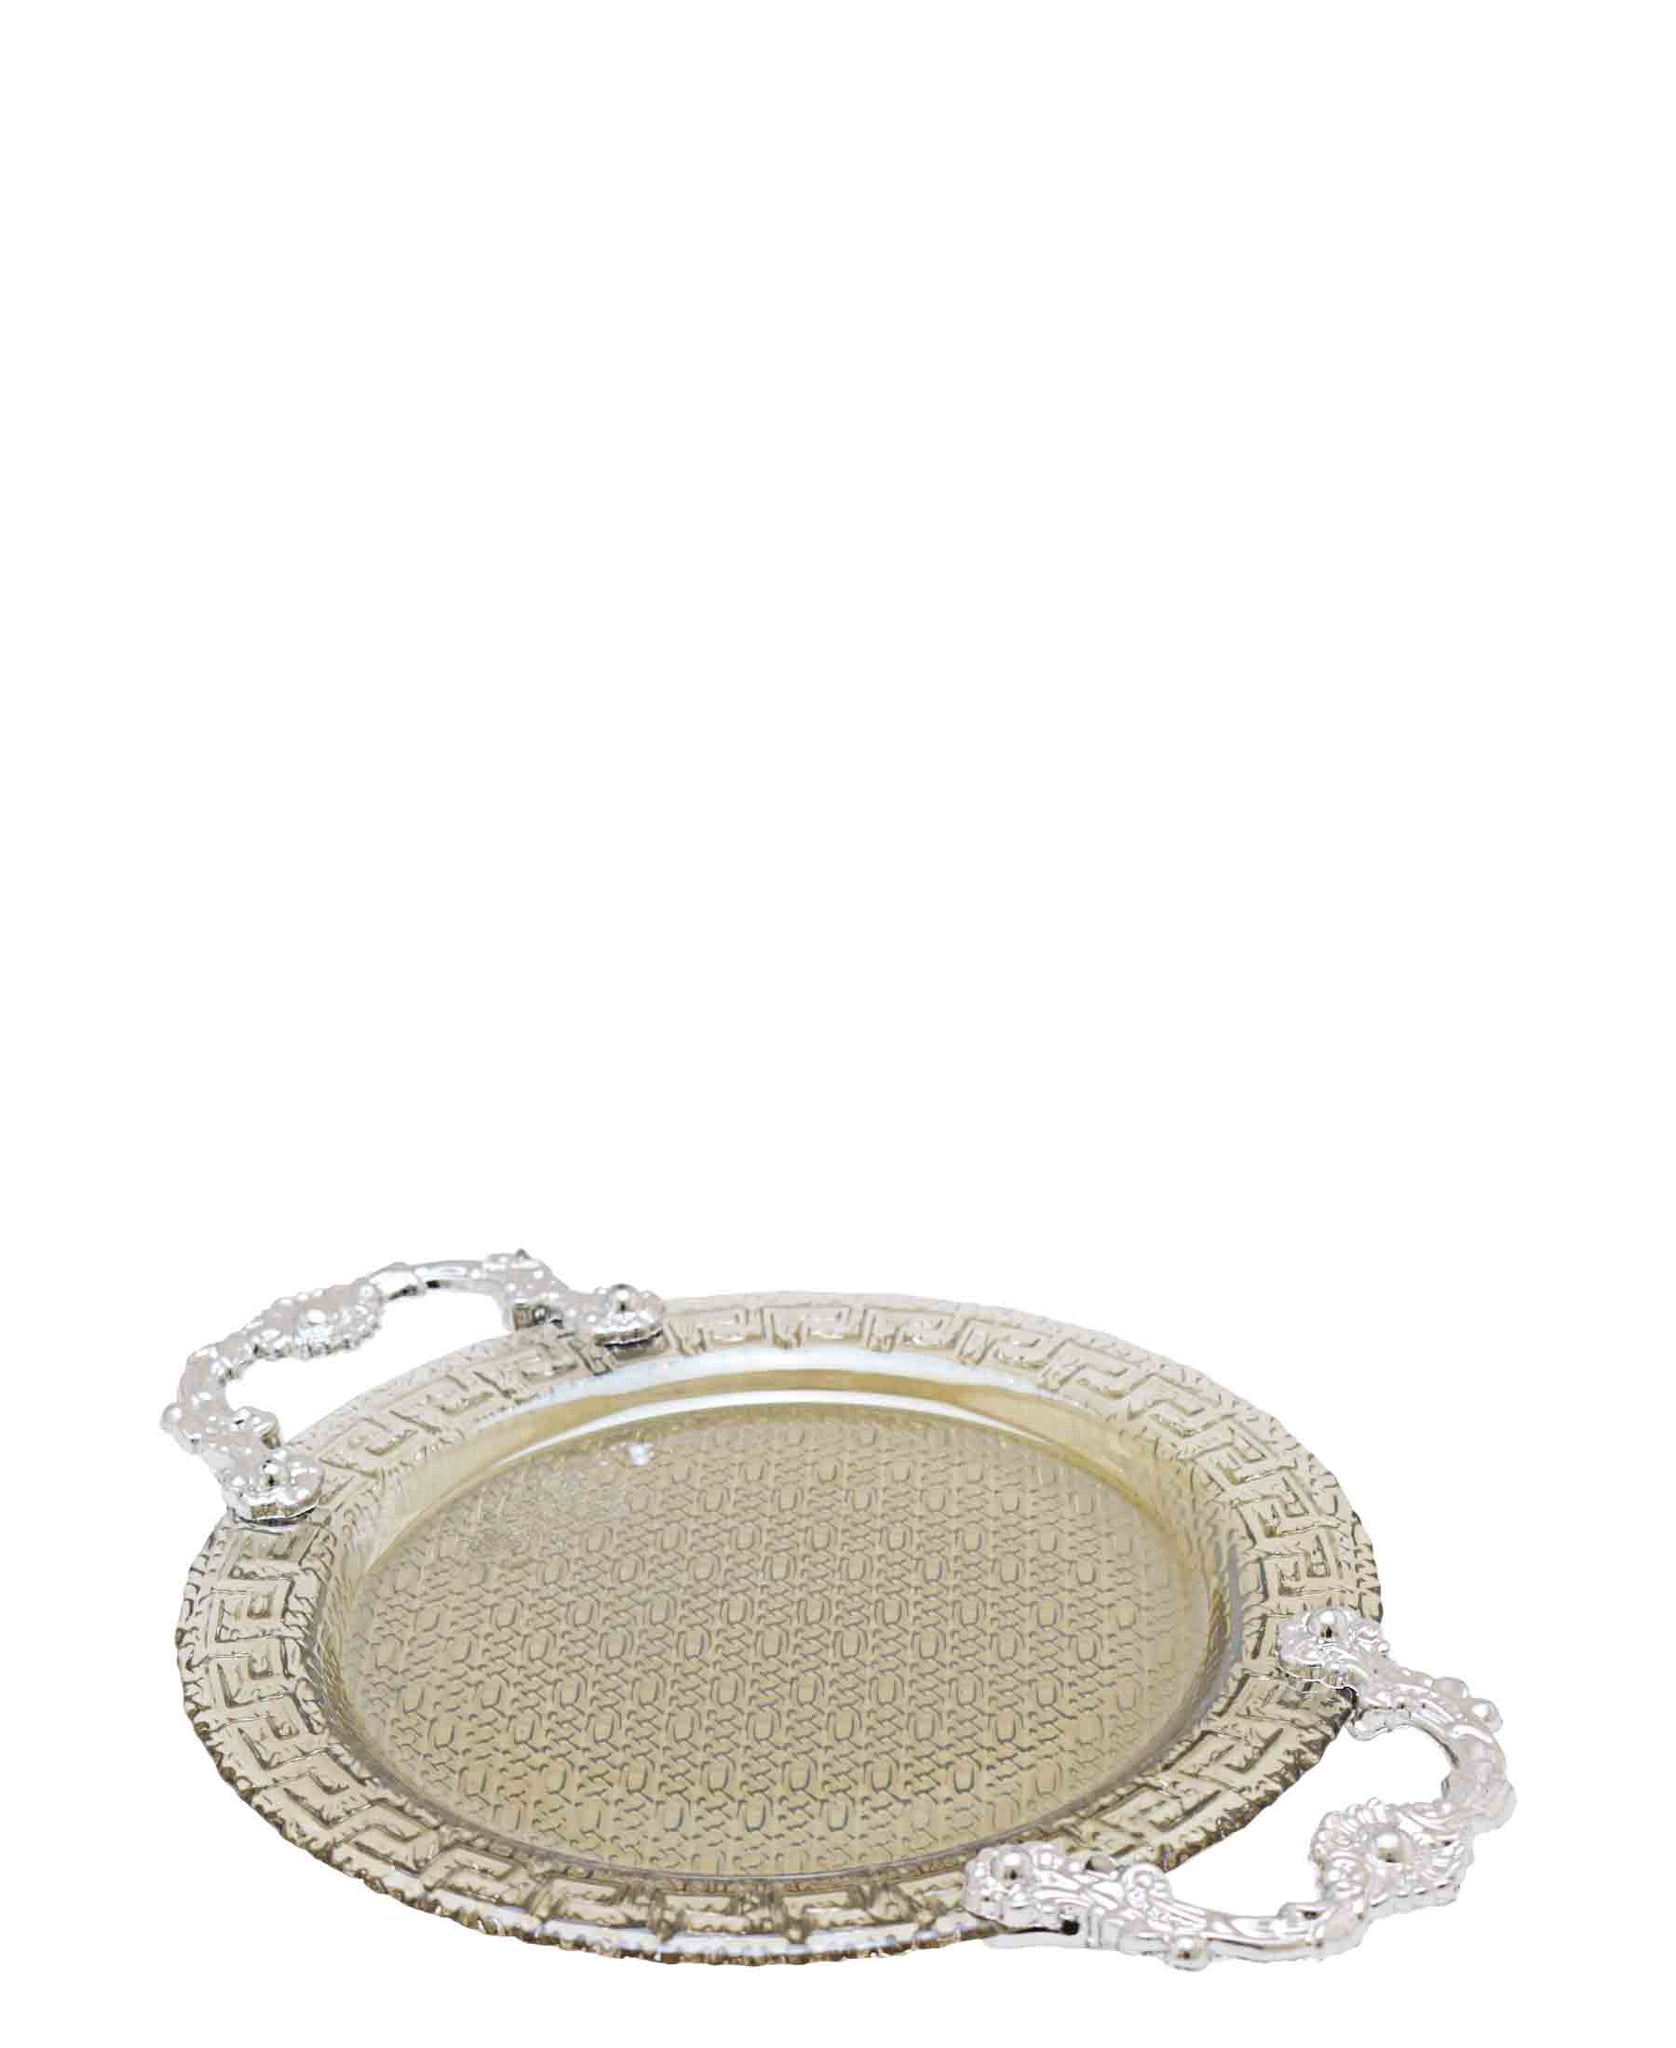 Bursa Collection Versace Glass Plate With Handles - Silver